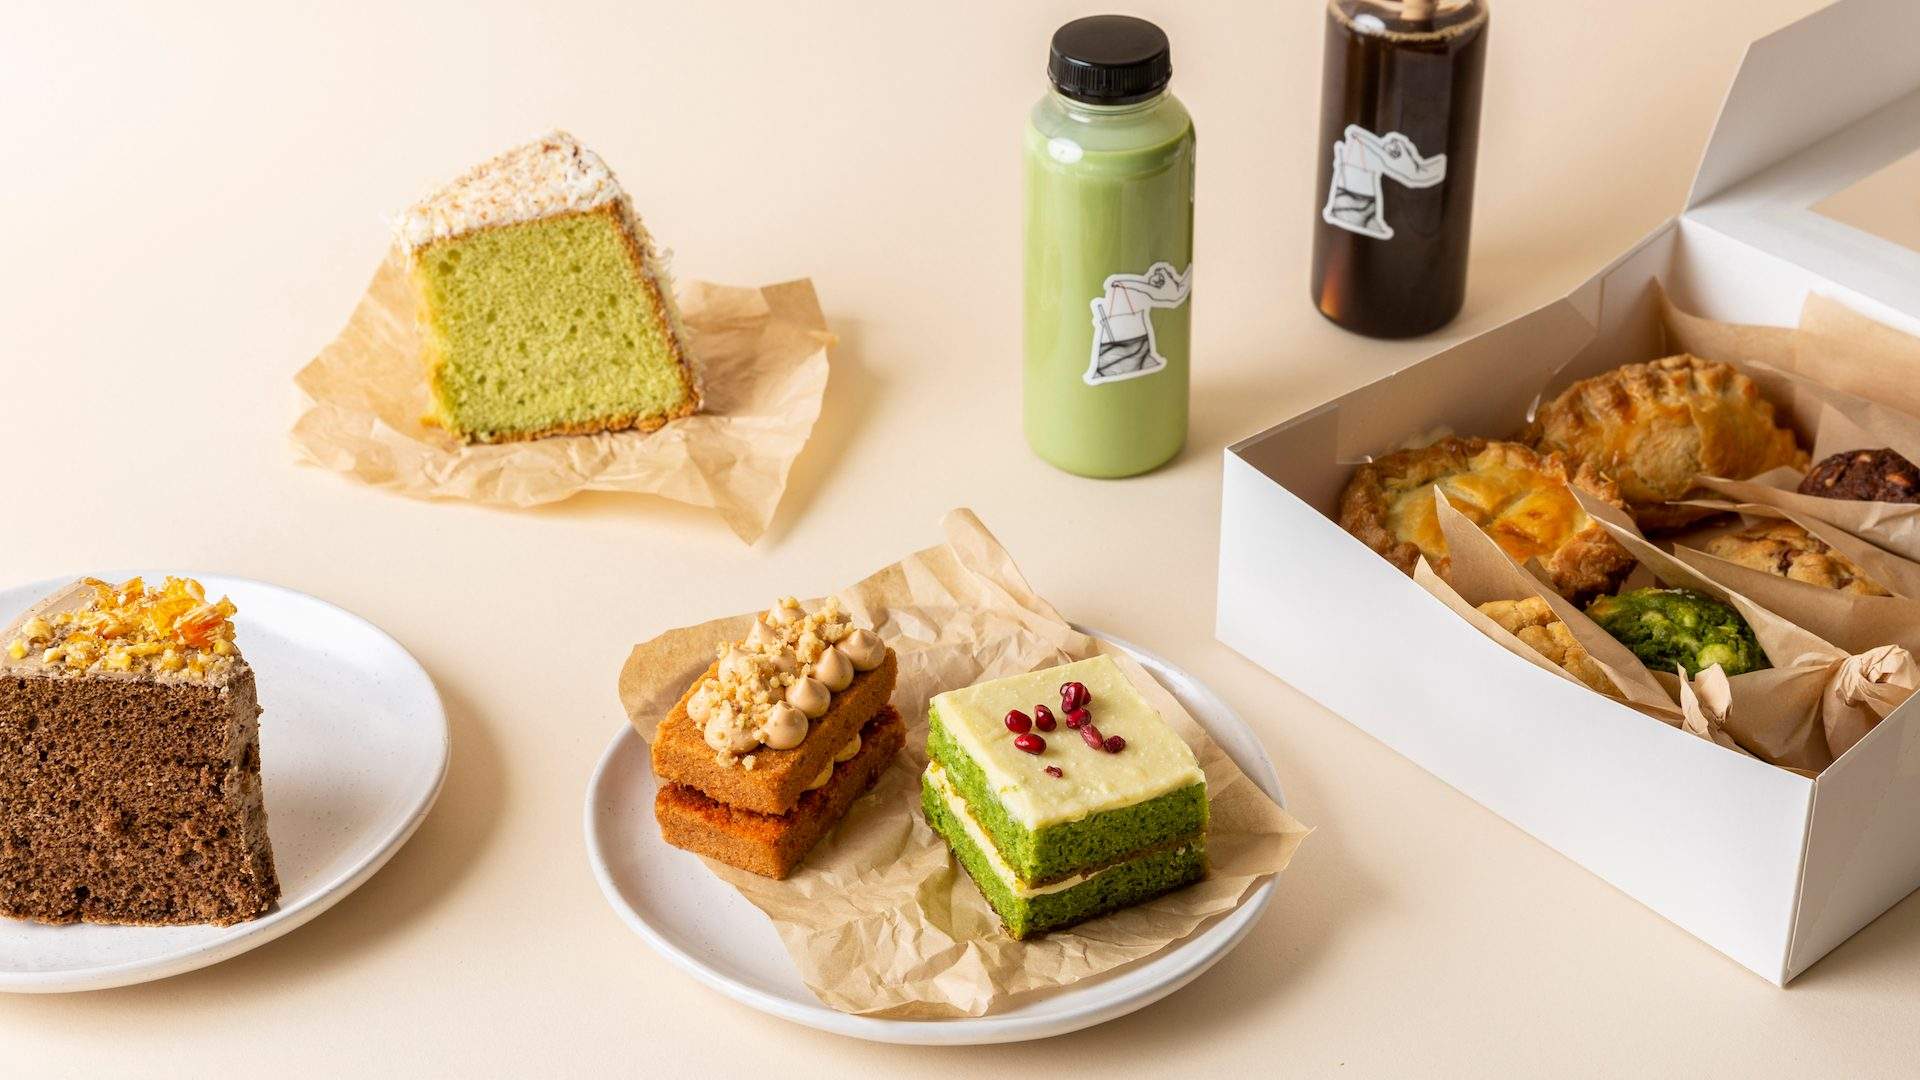 Raya Is Melbourne's New Bakery Brightening Up Lockdown with Malaysian Sweet and Savoury Treats